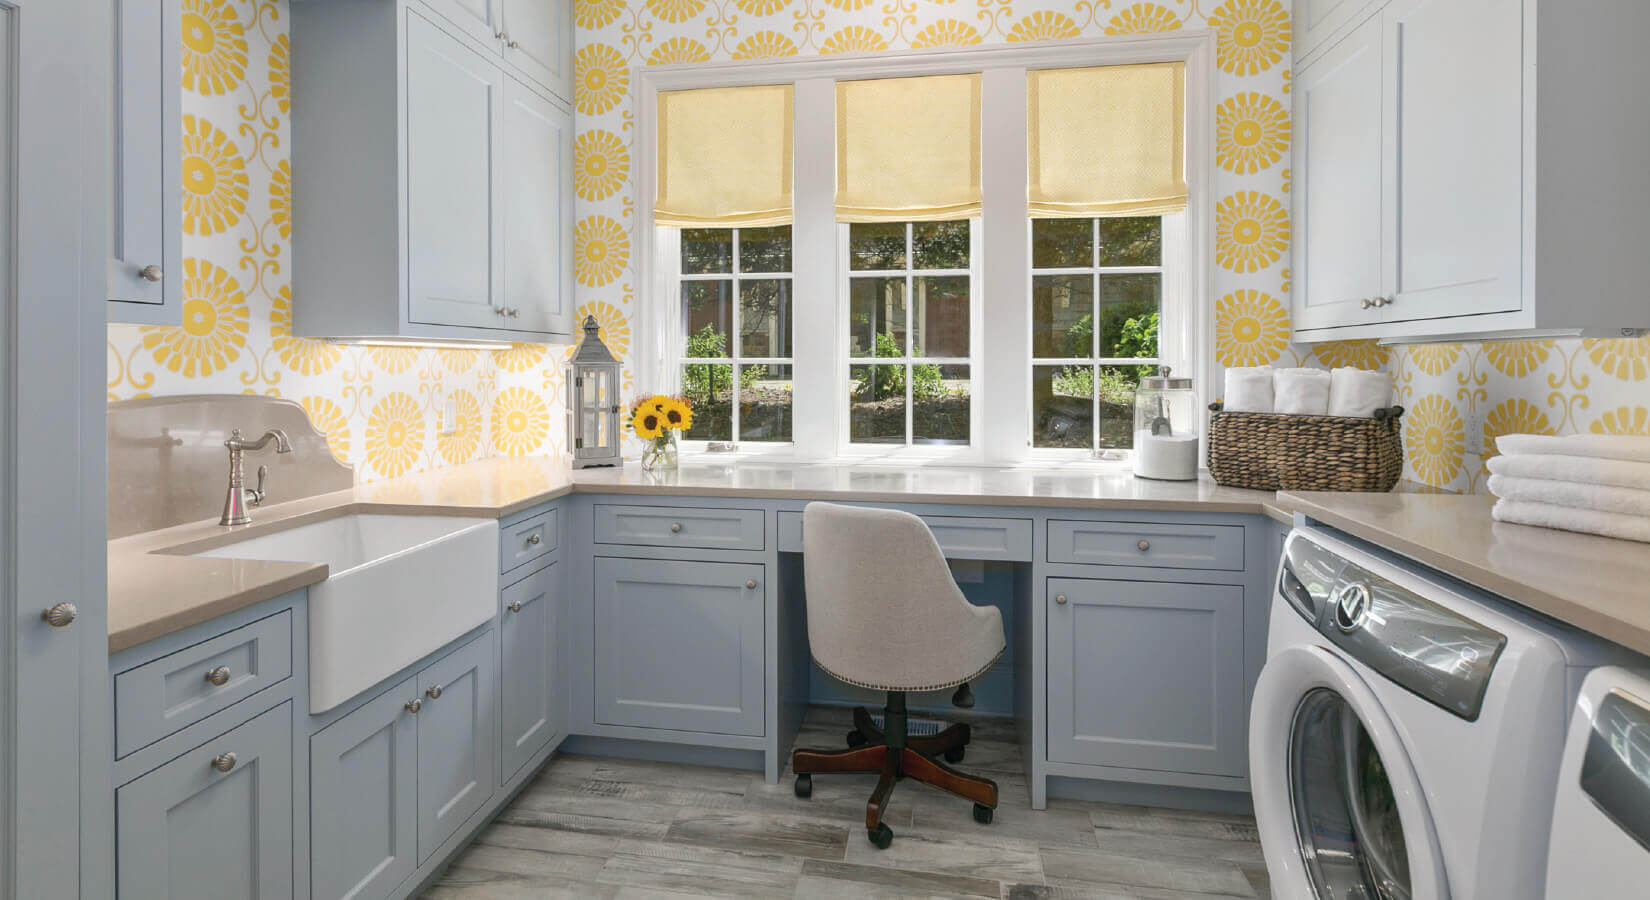 Laundry room with pastel blue cabinets, farmhouse sink, and yellow flower wallpaper.